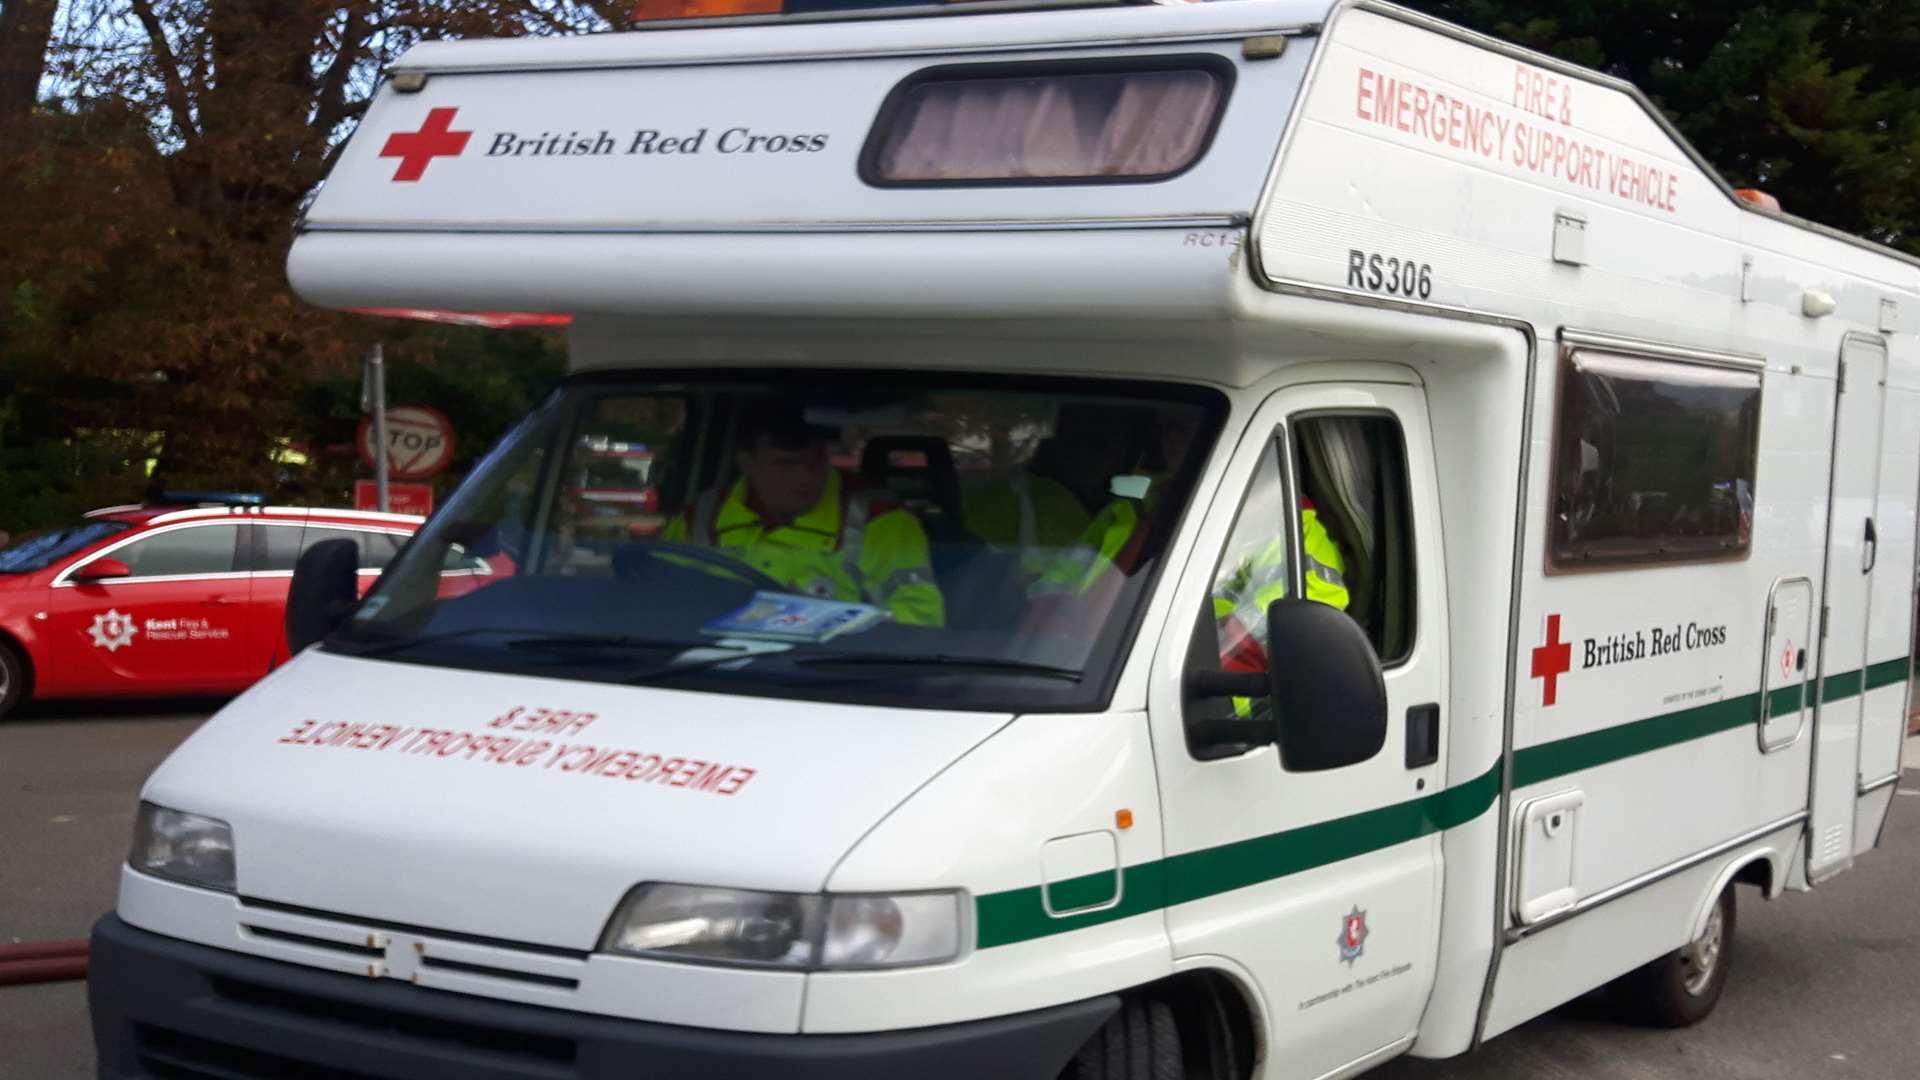 A British Red Cross team was sent to help residents